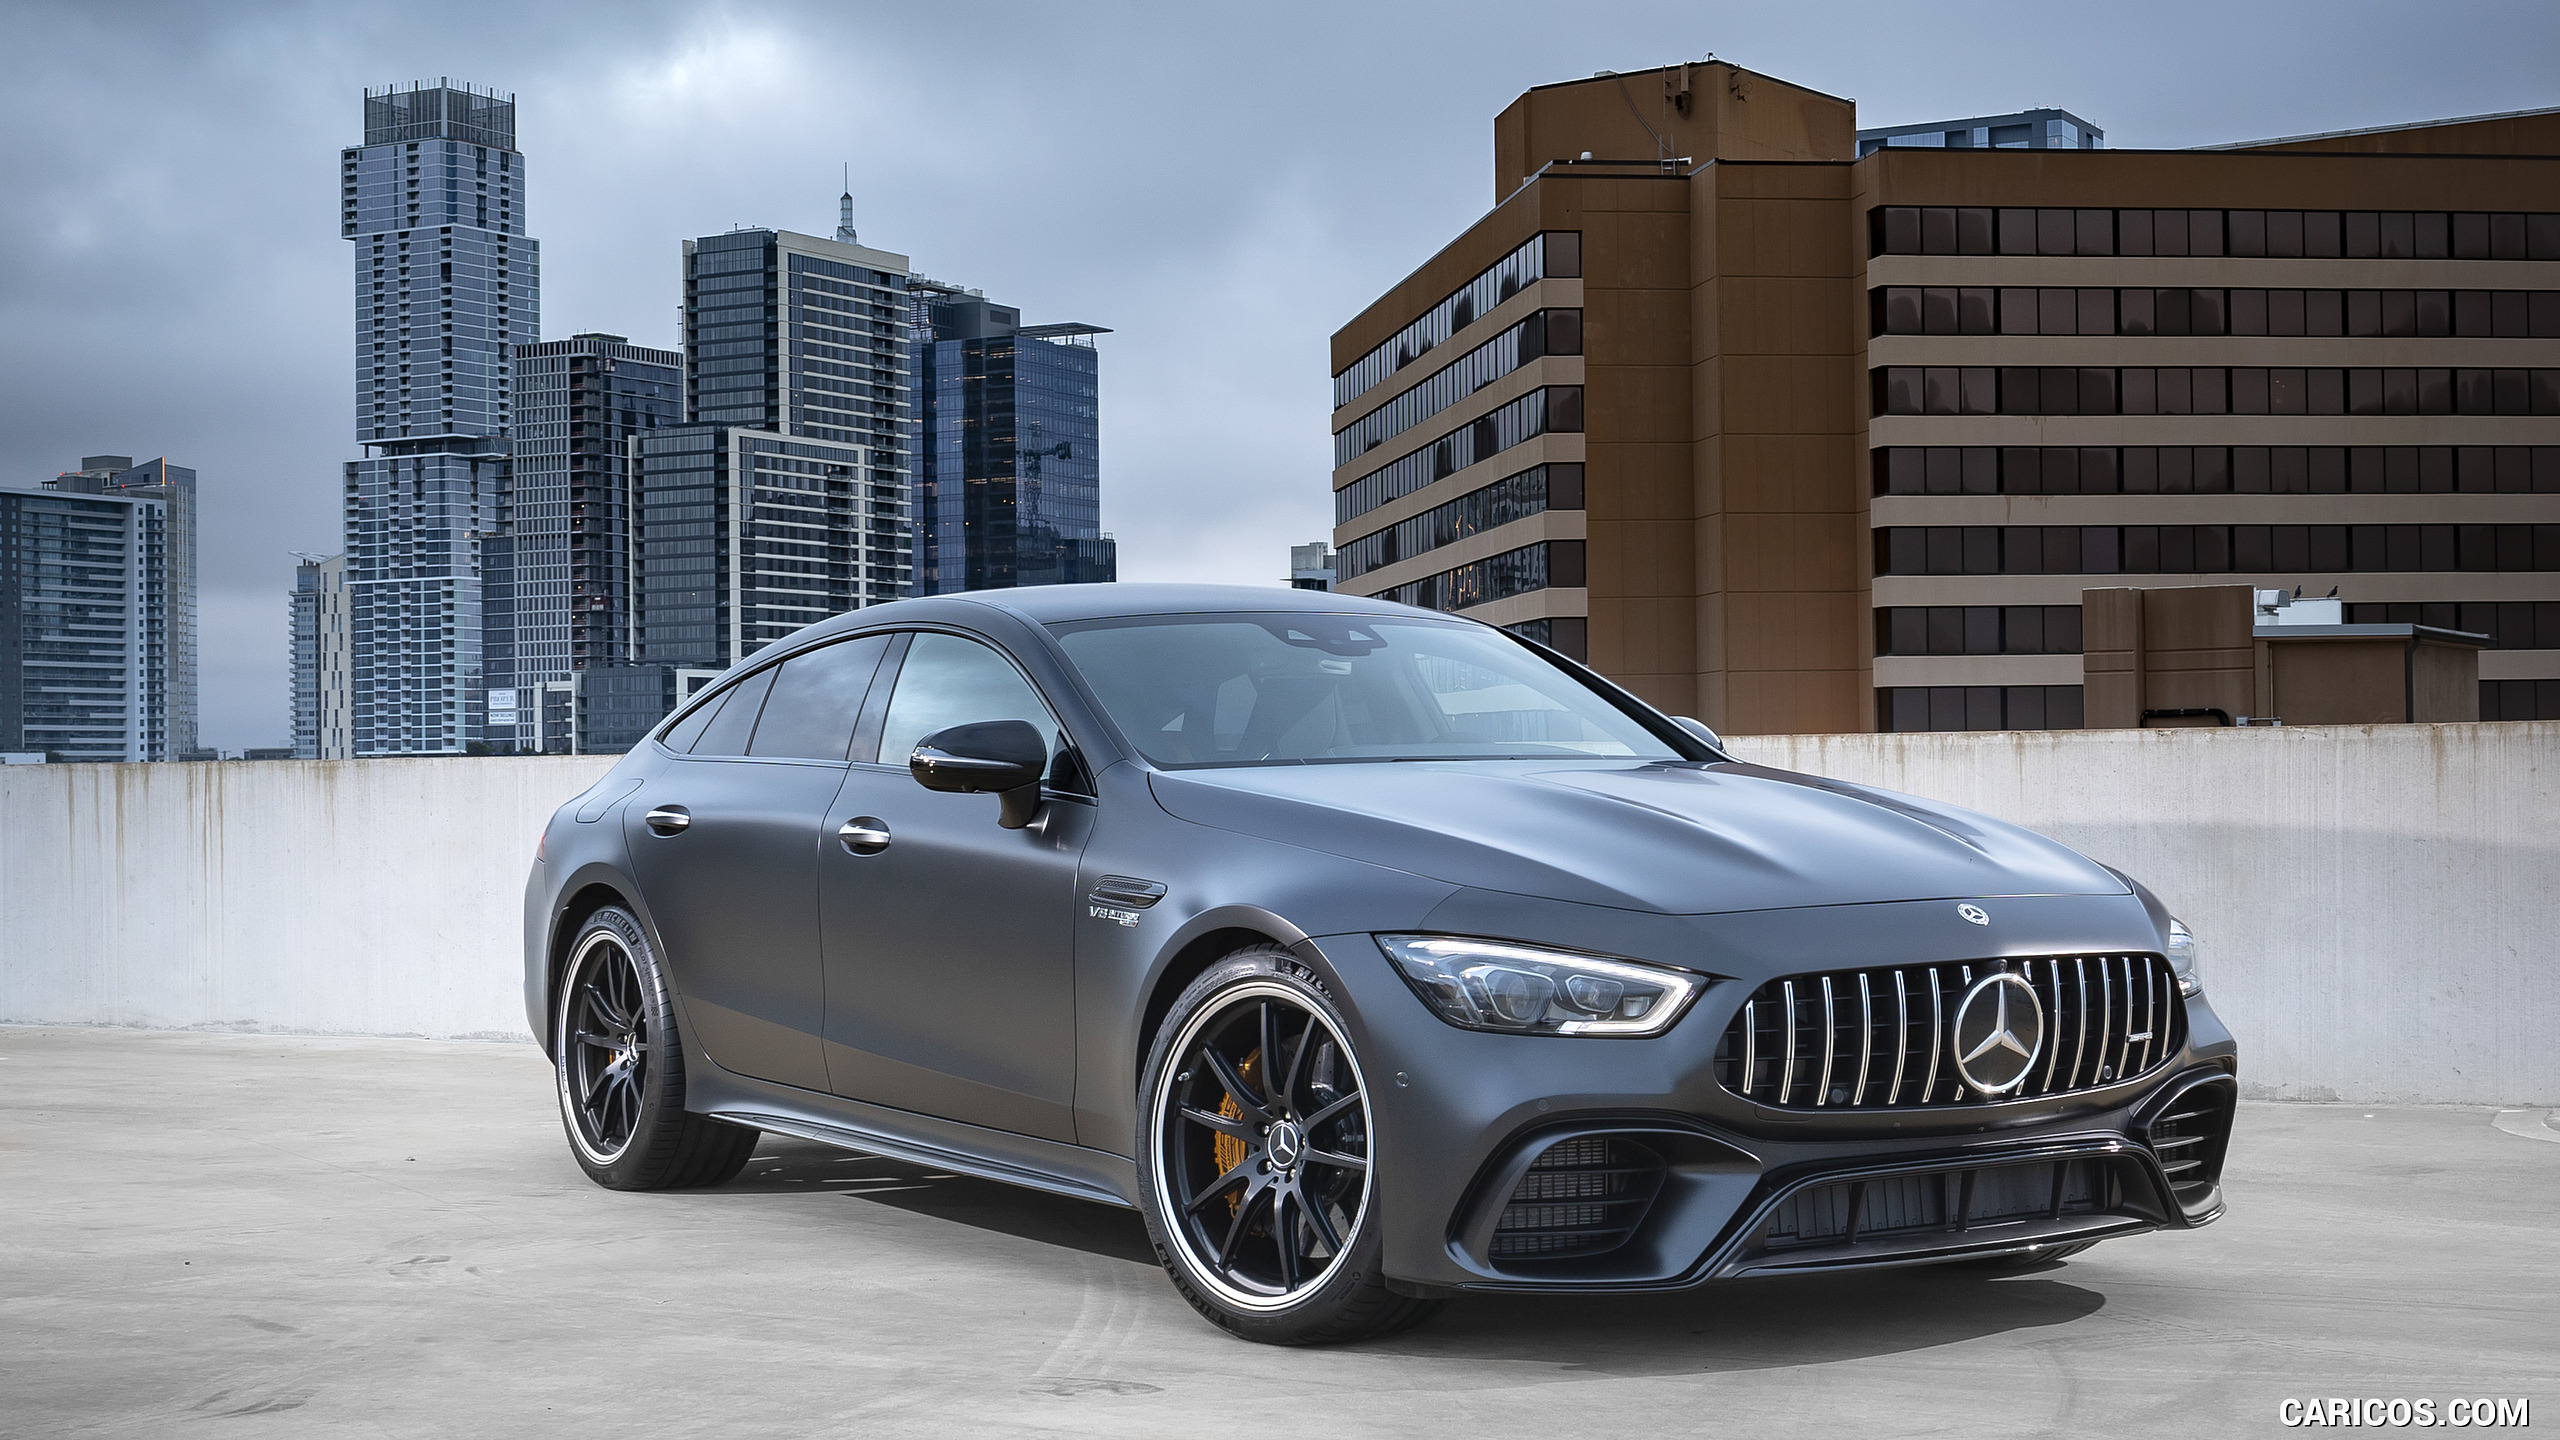 2019 Mercedes-AMG GT 63 S 4MATIC+ 4-Door Coupe - Front Three-Quarter, #207 of 427